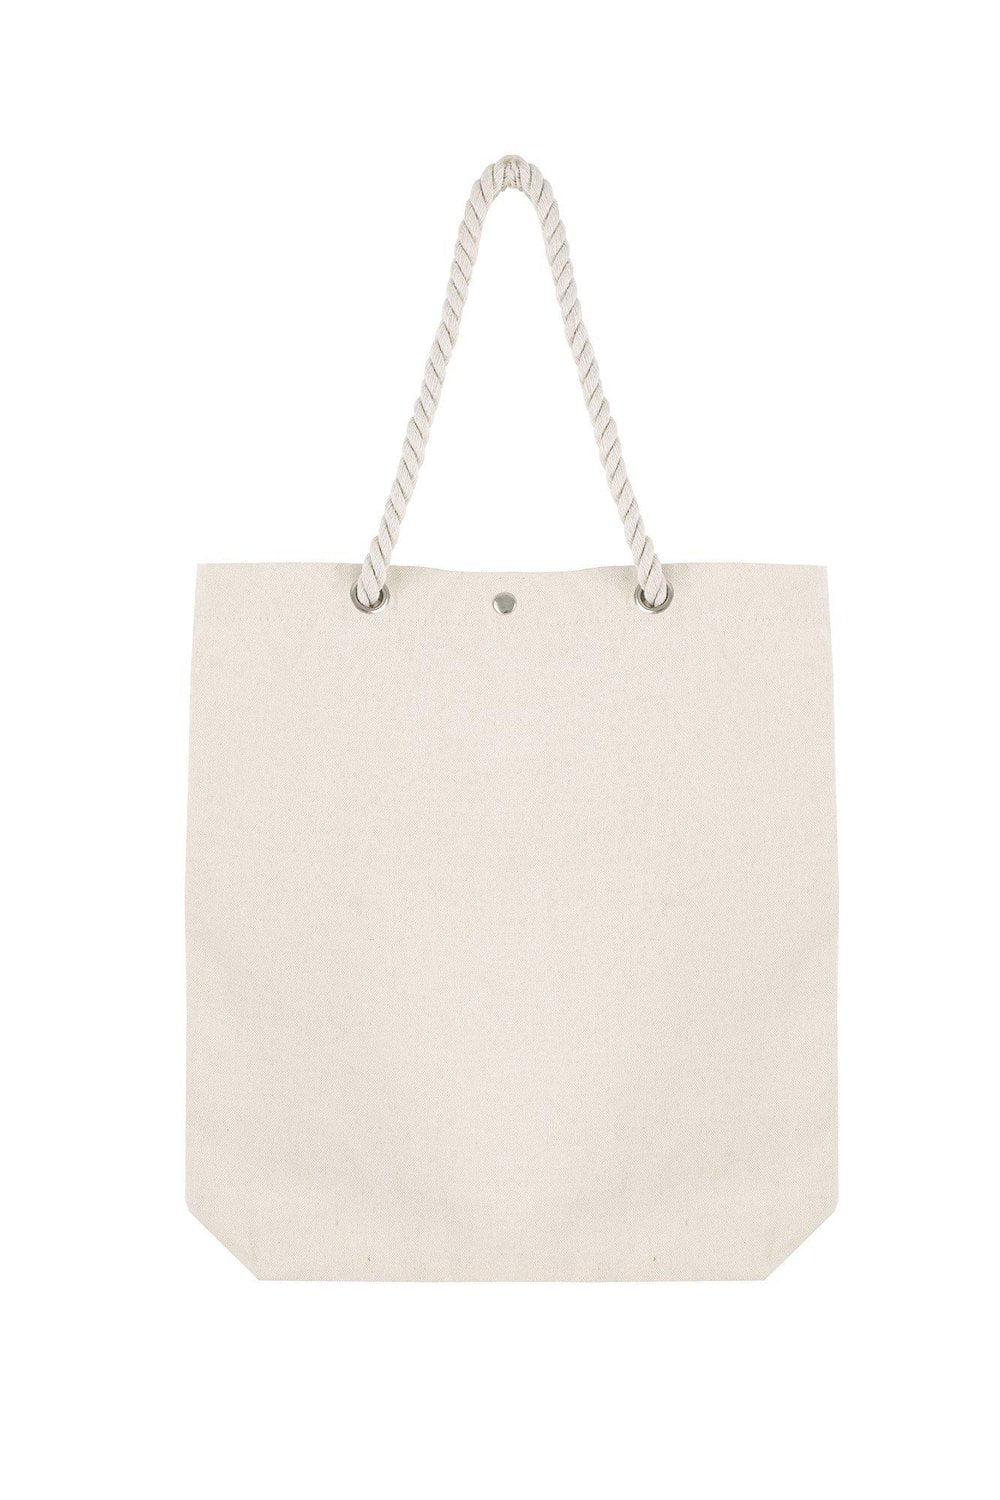 Premium Canvas Tote Bag with Rope Handles and Metal Button Closure ...